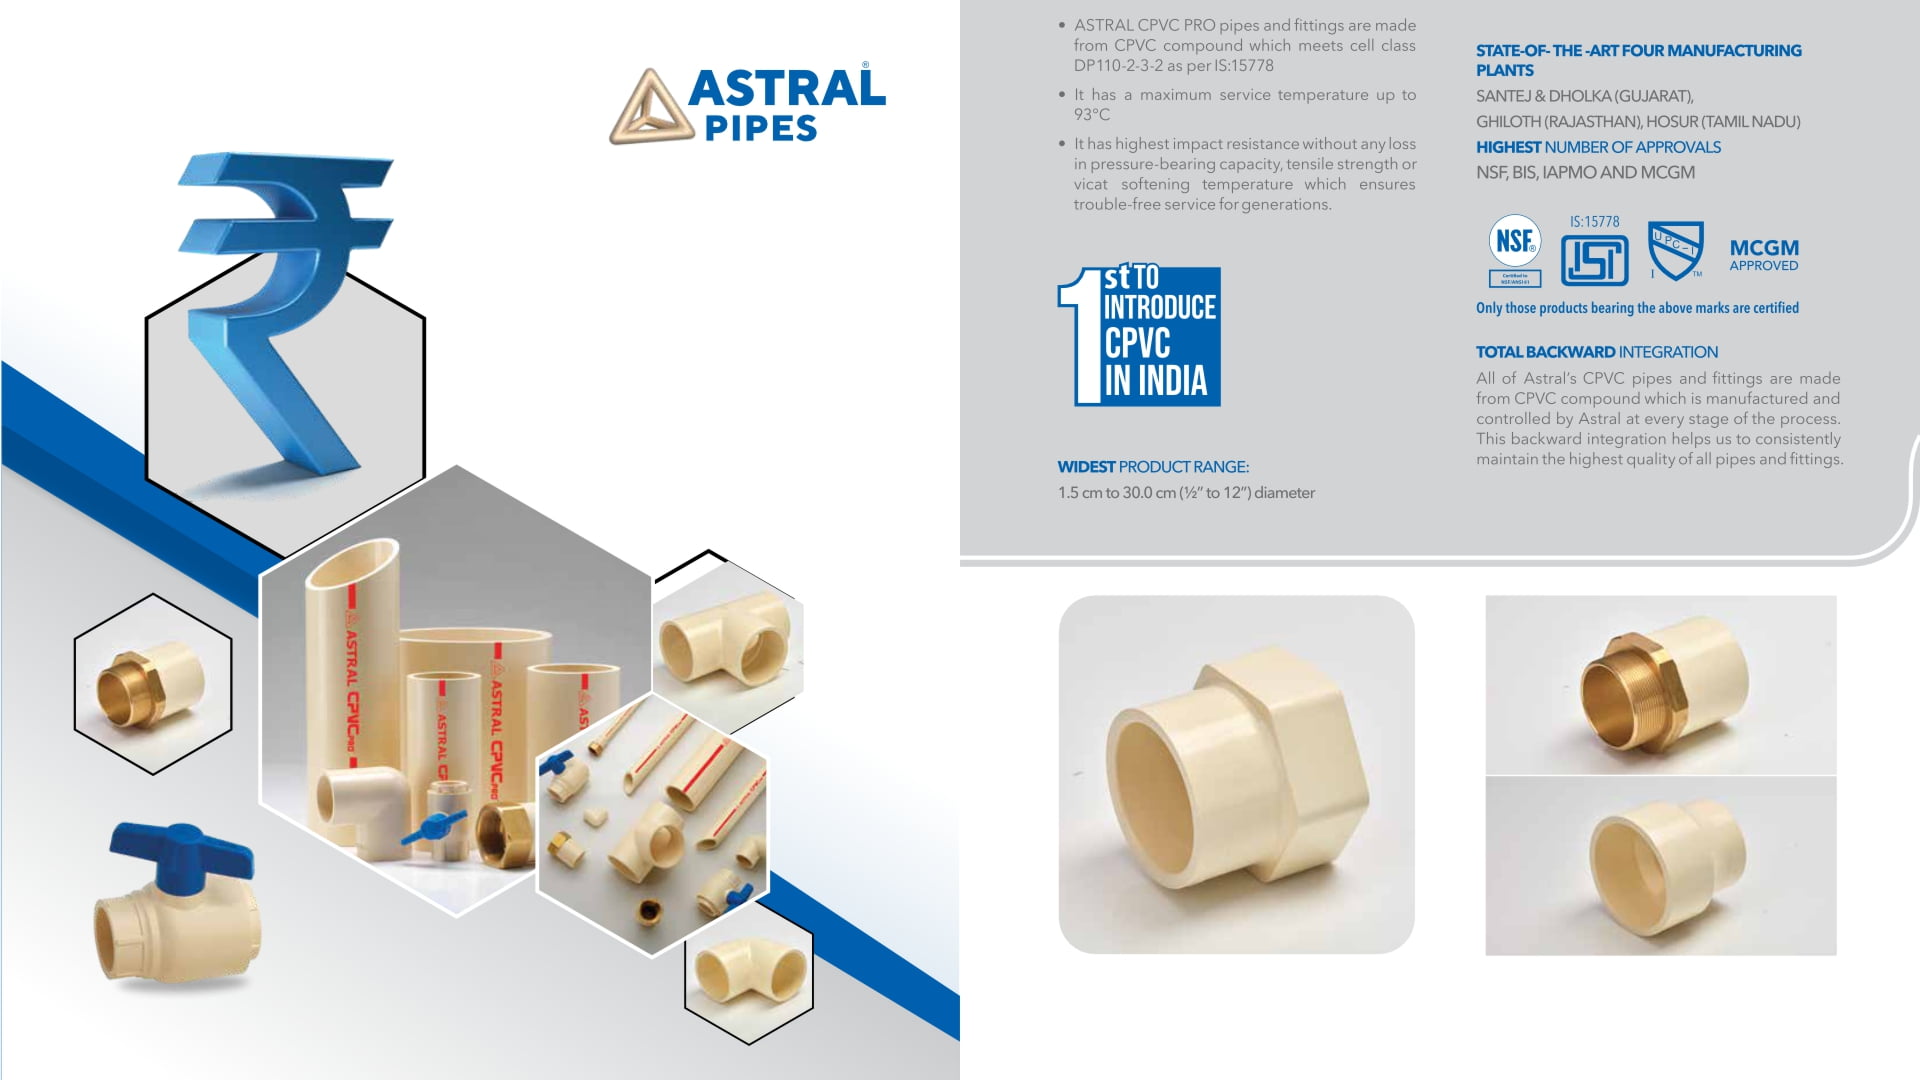 Astral CPVC Pipes - Designer Floor Drainer Catalogue